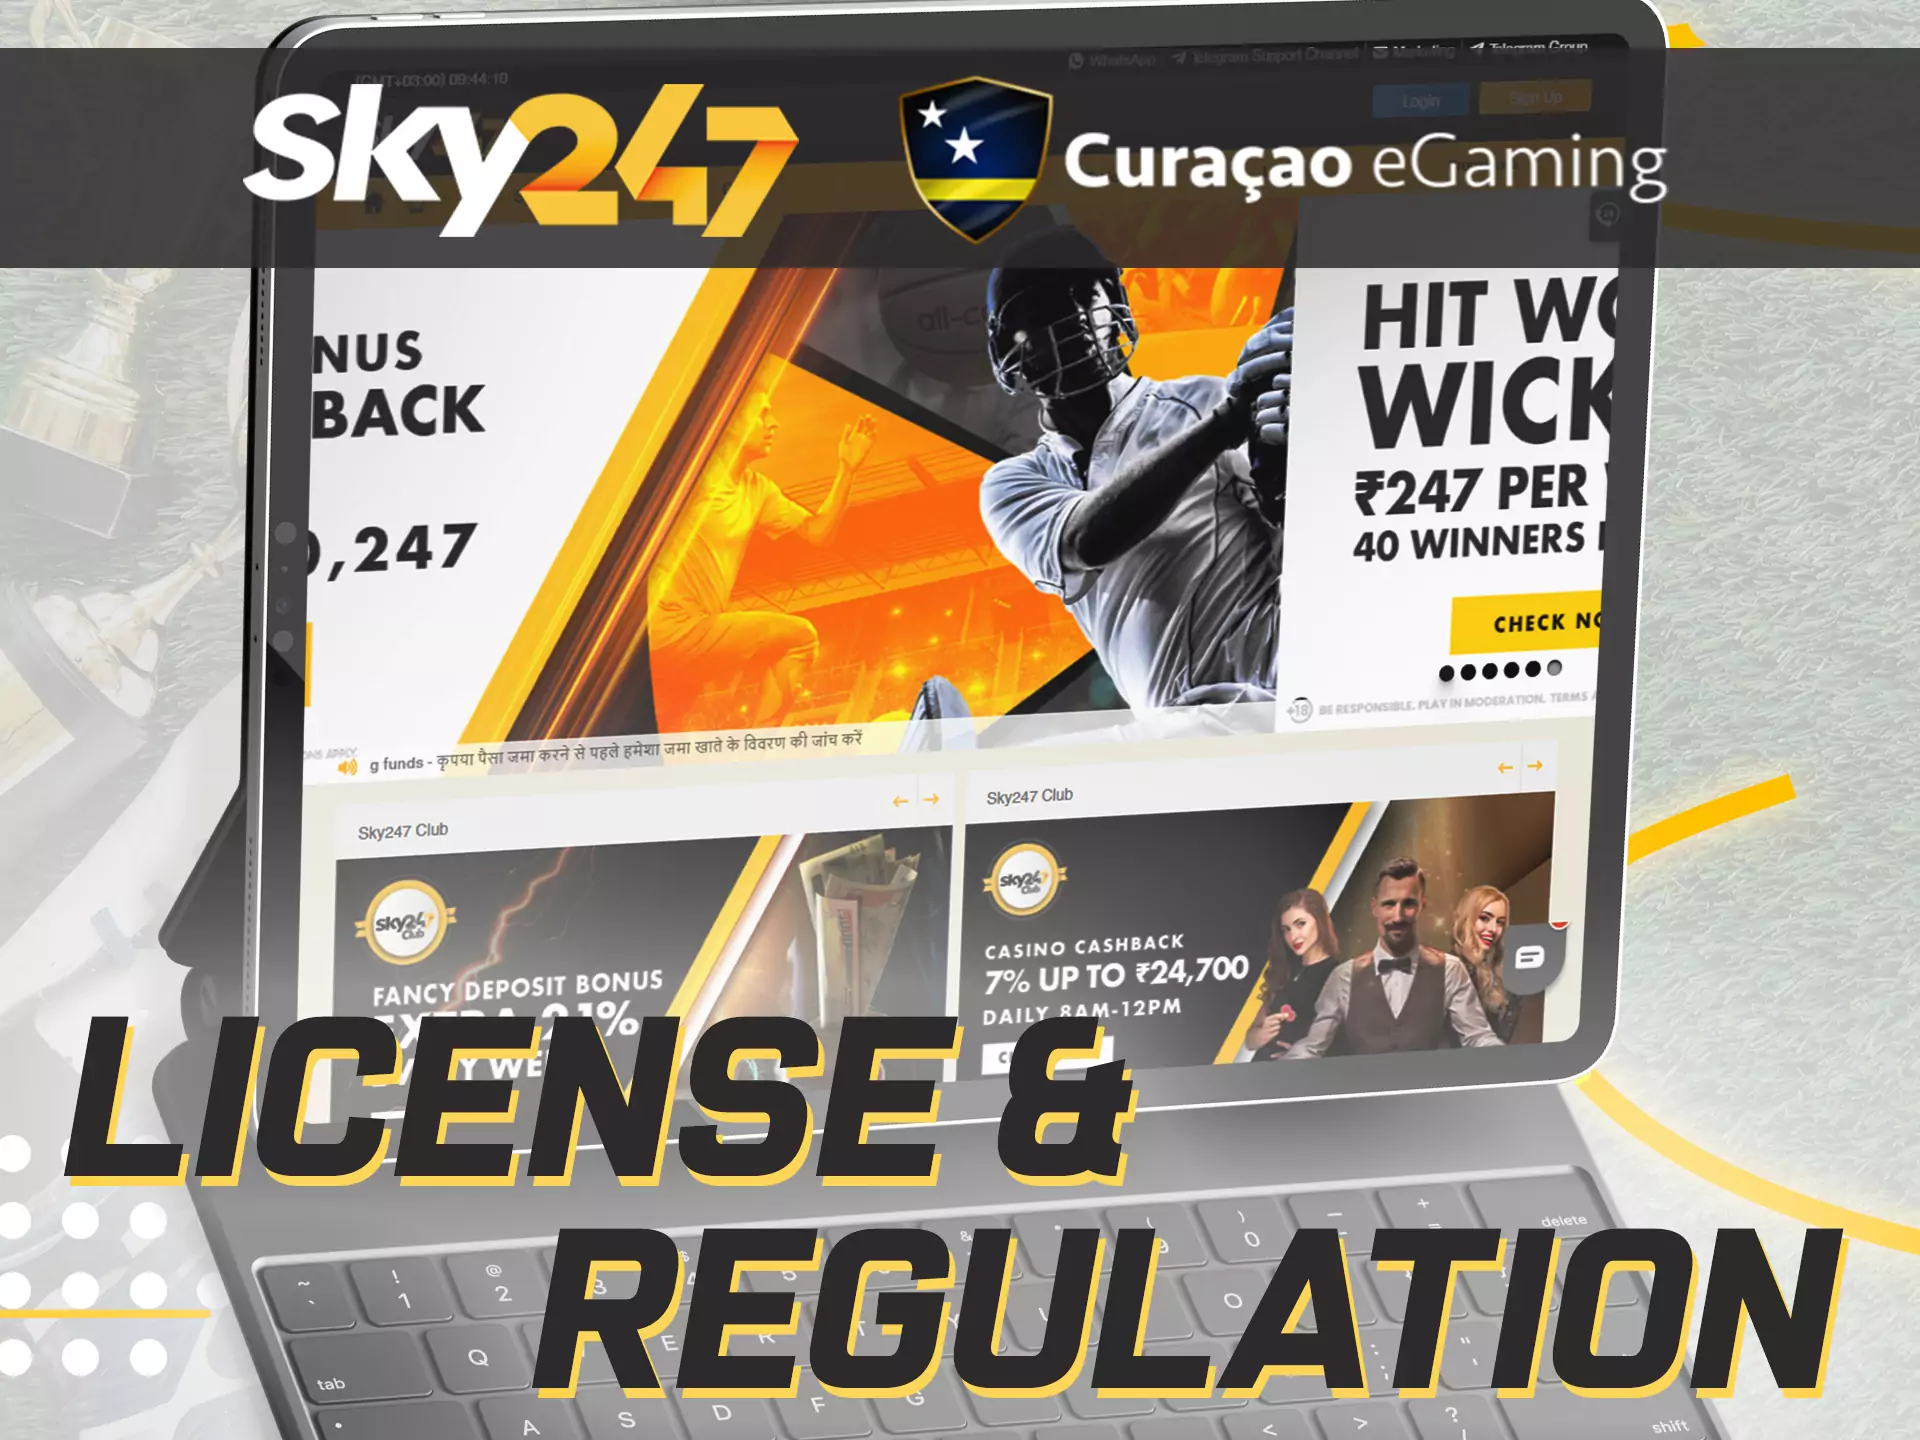 Sky247 works under the Curacao Egaming license and legally provides betting entertainment.